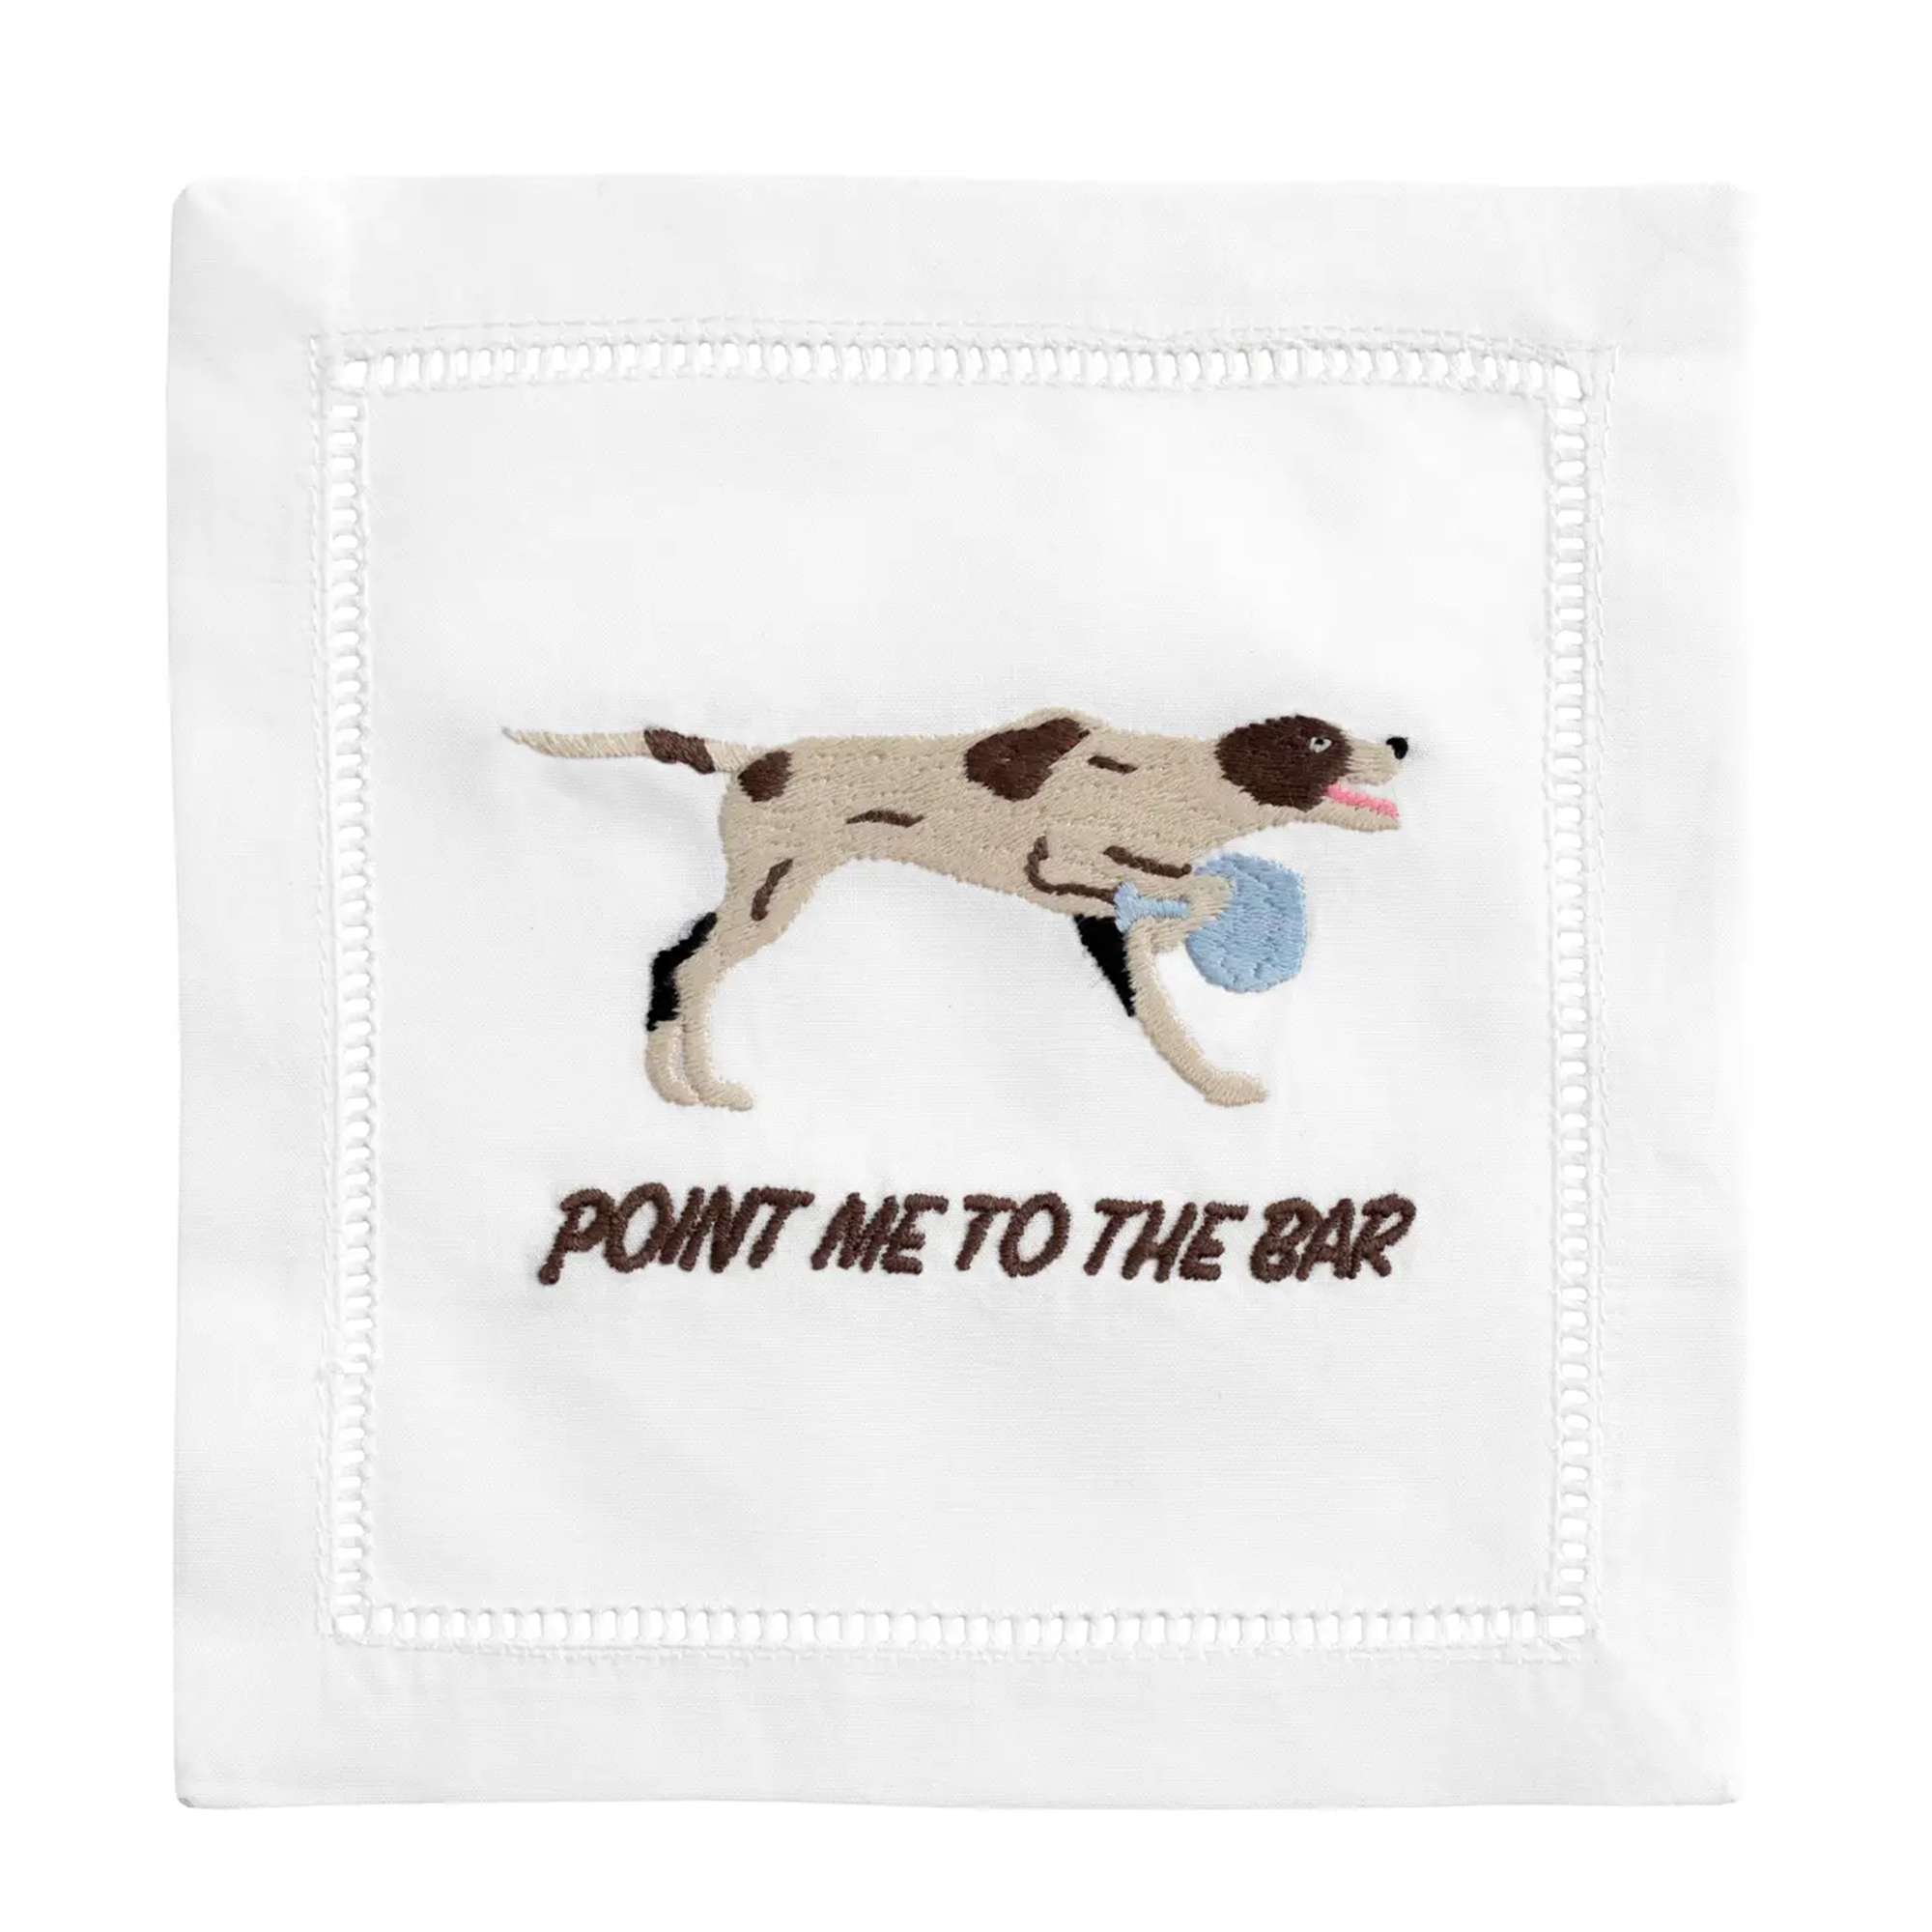 A humorous design featuring a dog holding a paddle, humorously suggesting that it's time to head to the bar and enjoy some drinks at your party.